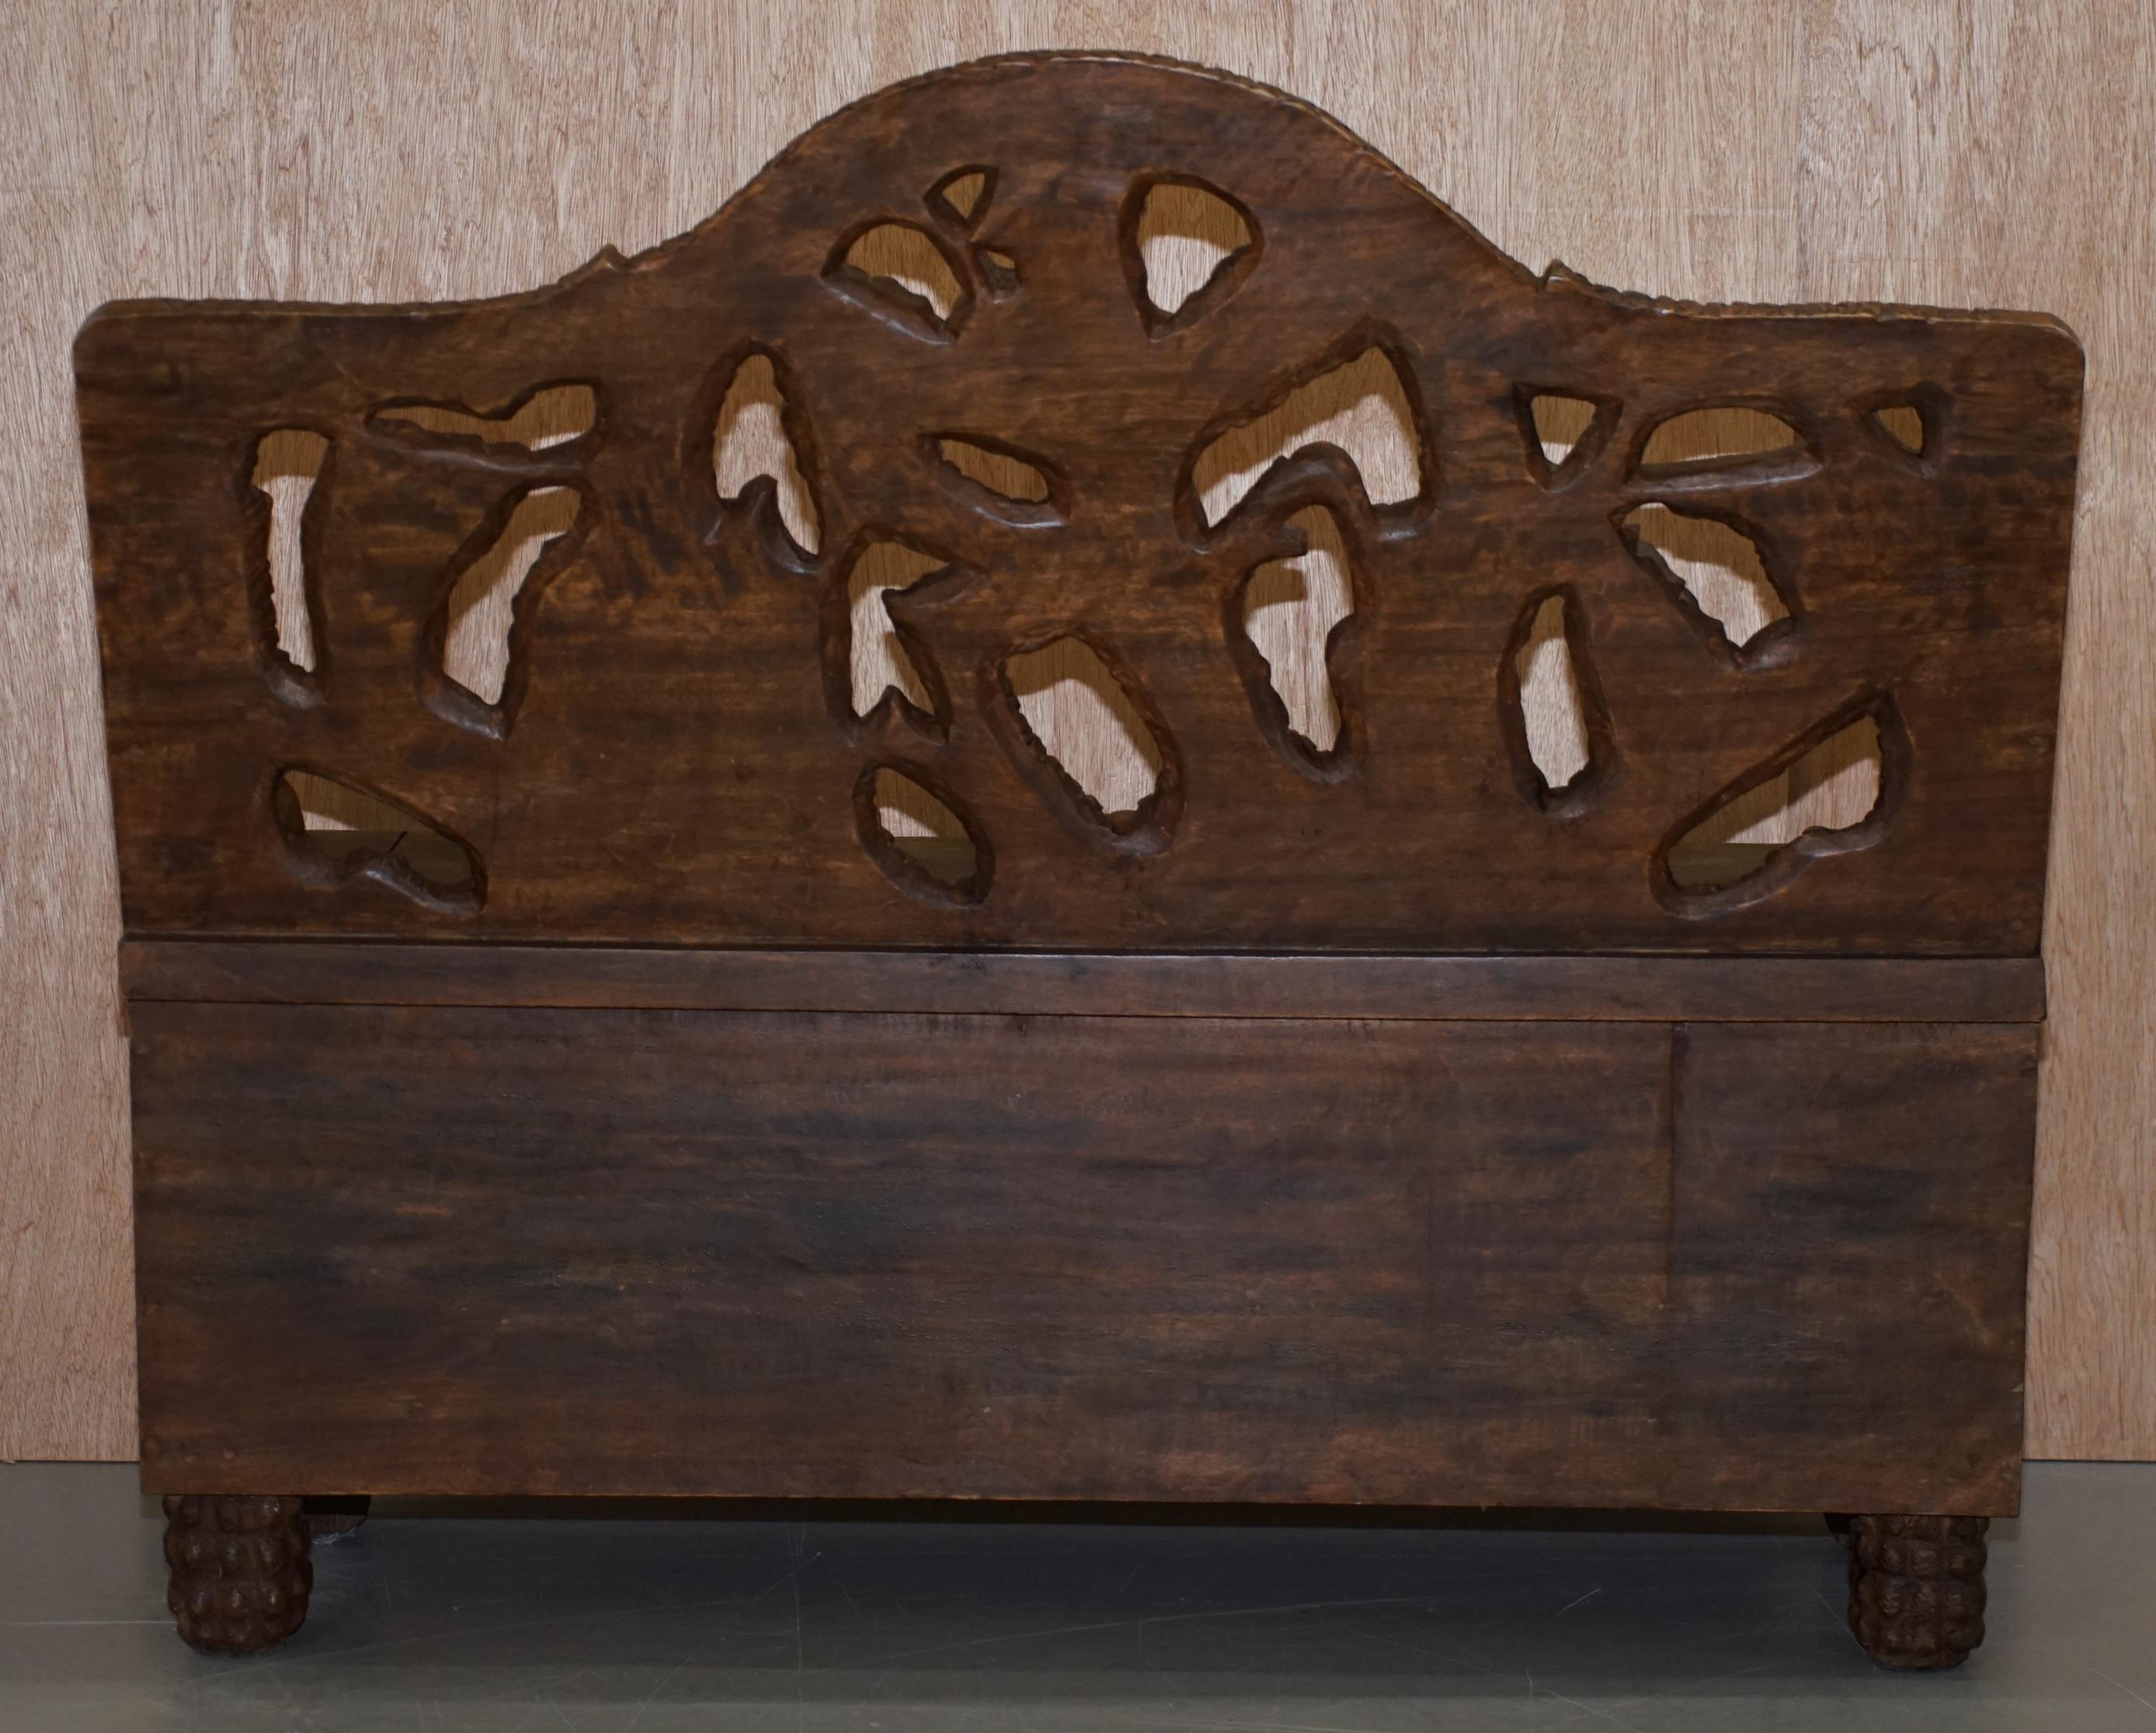 Lovely Vintage Black Forest Wood Bear Bench with Internal Storage Part of Suite 8